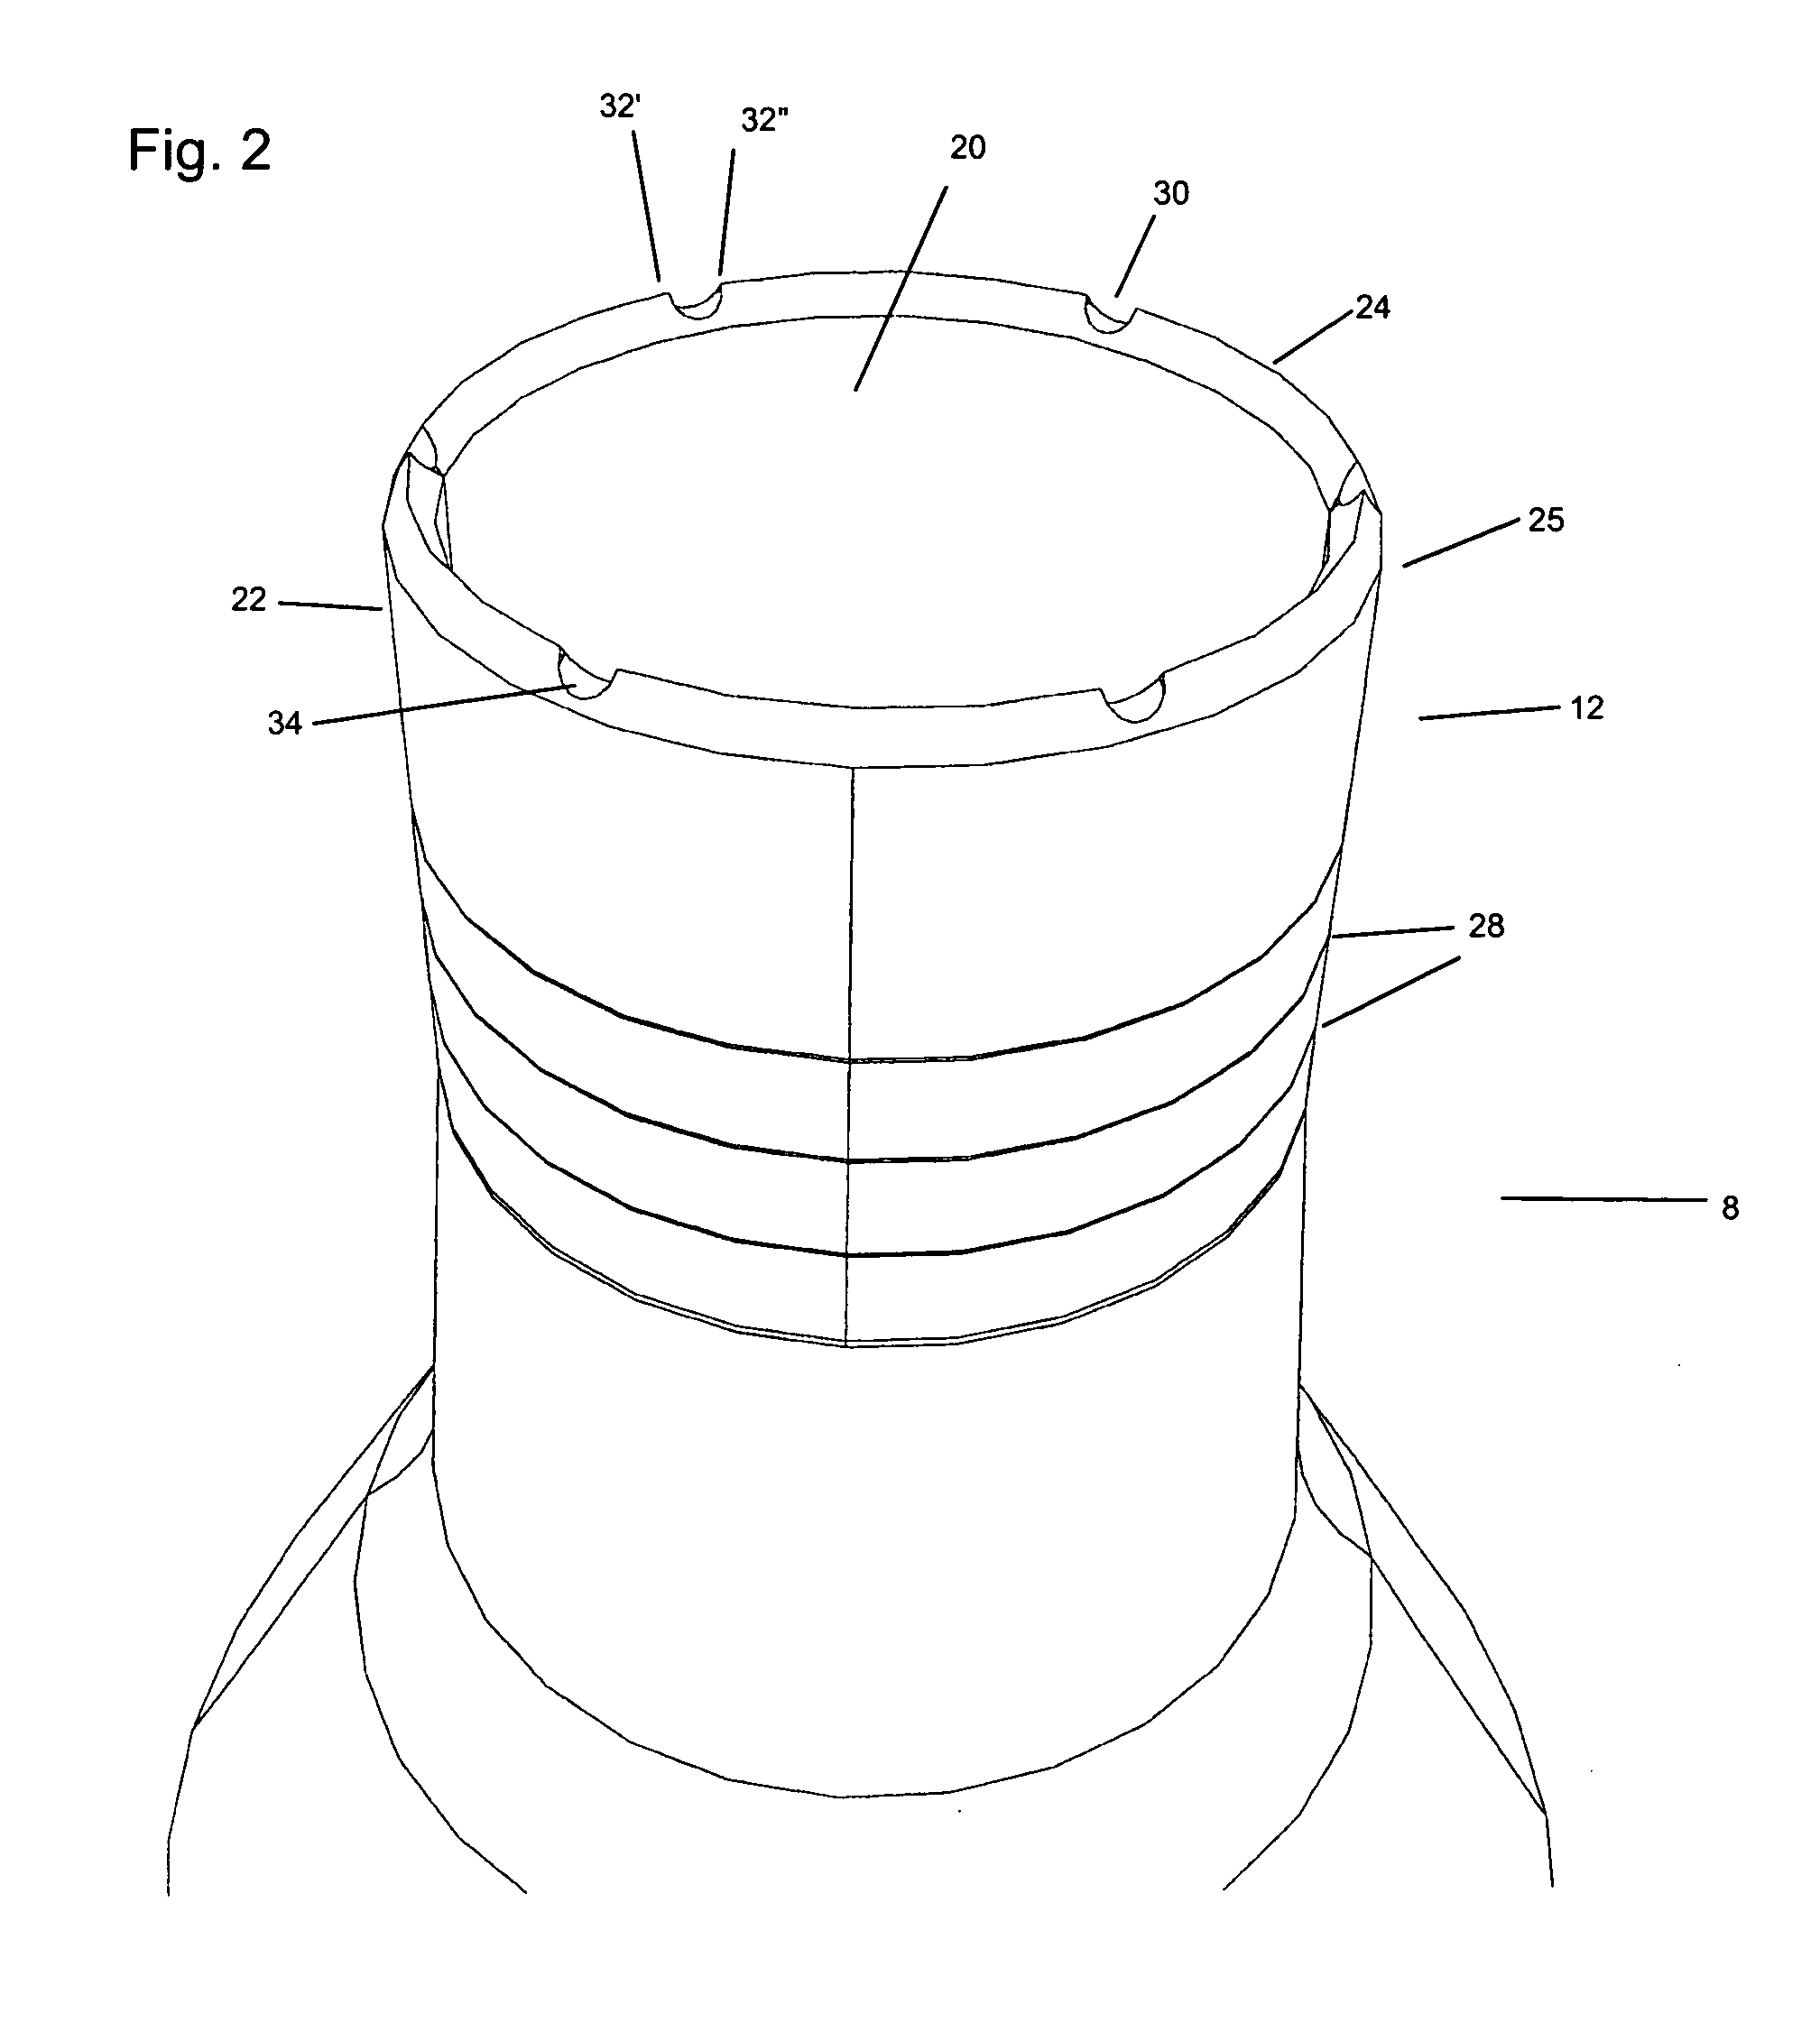 Coring device for preserving living tissue